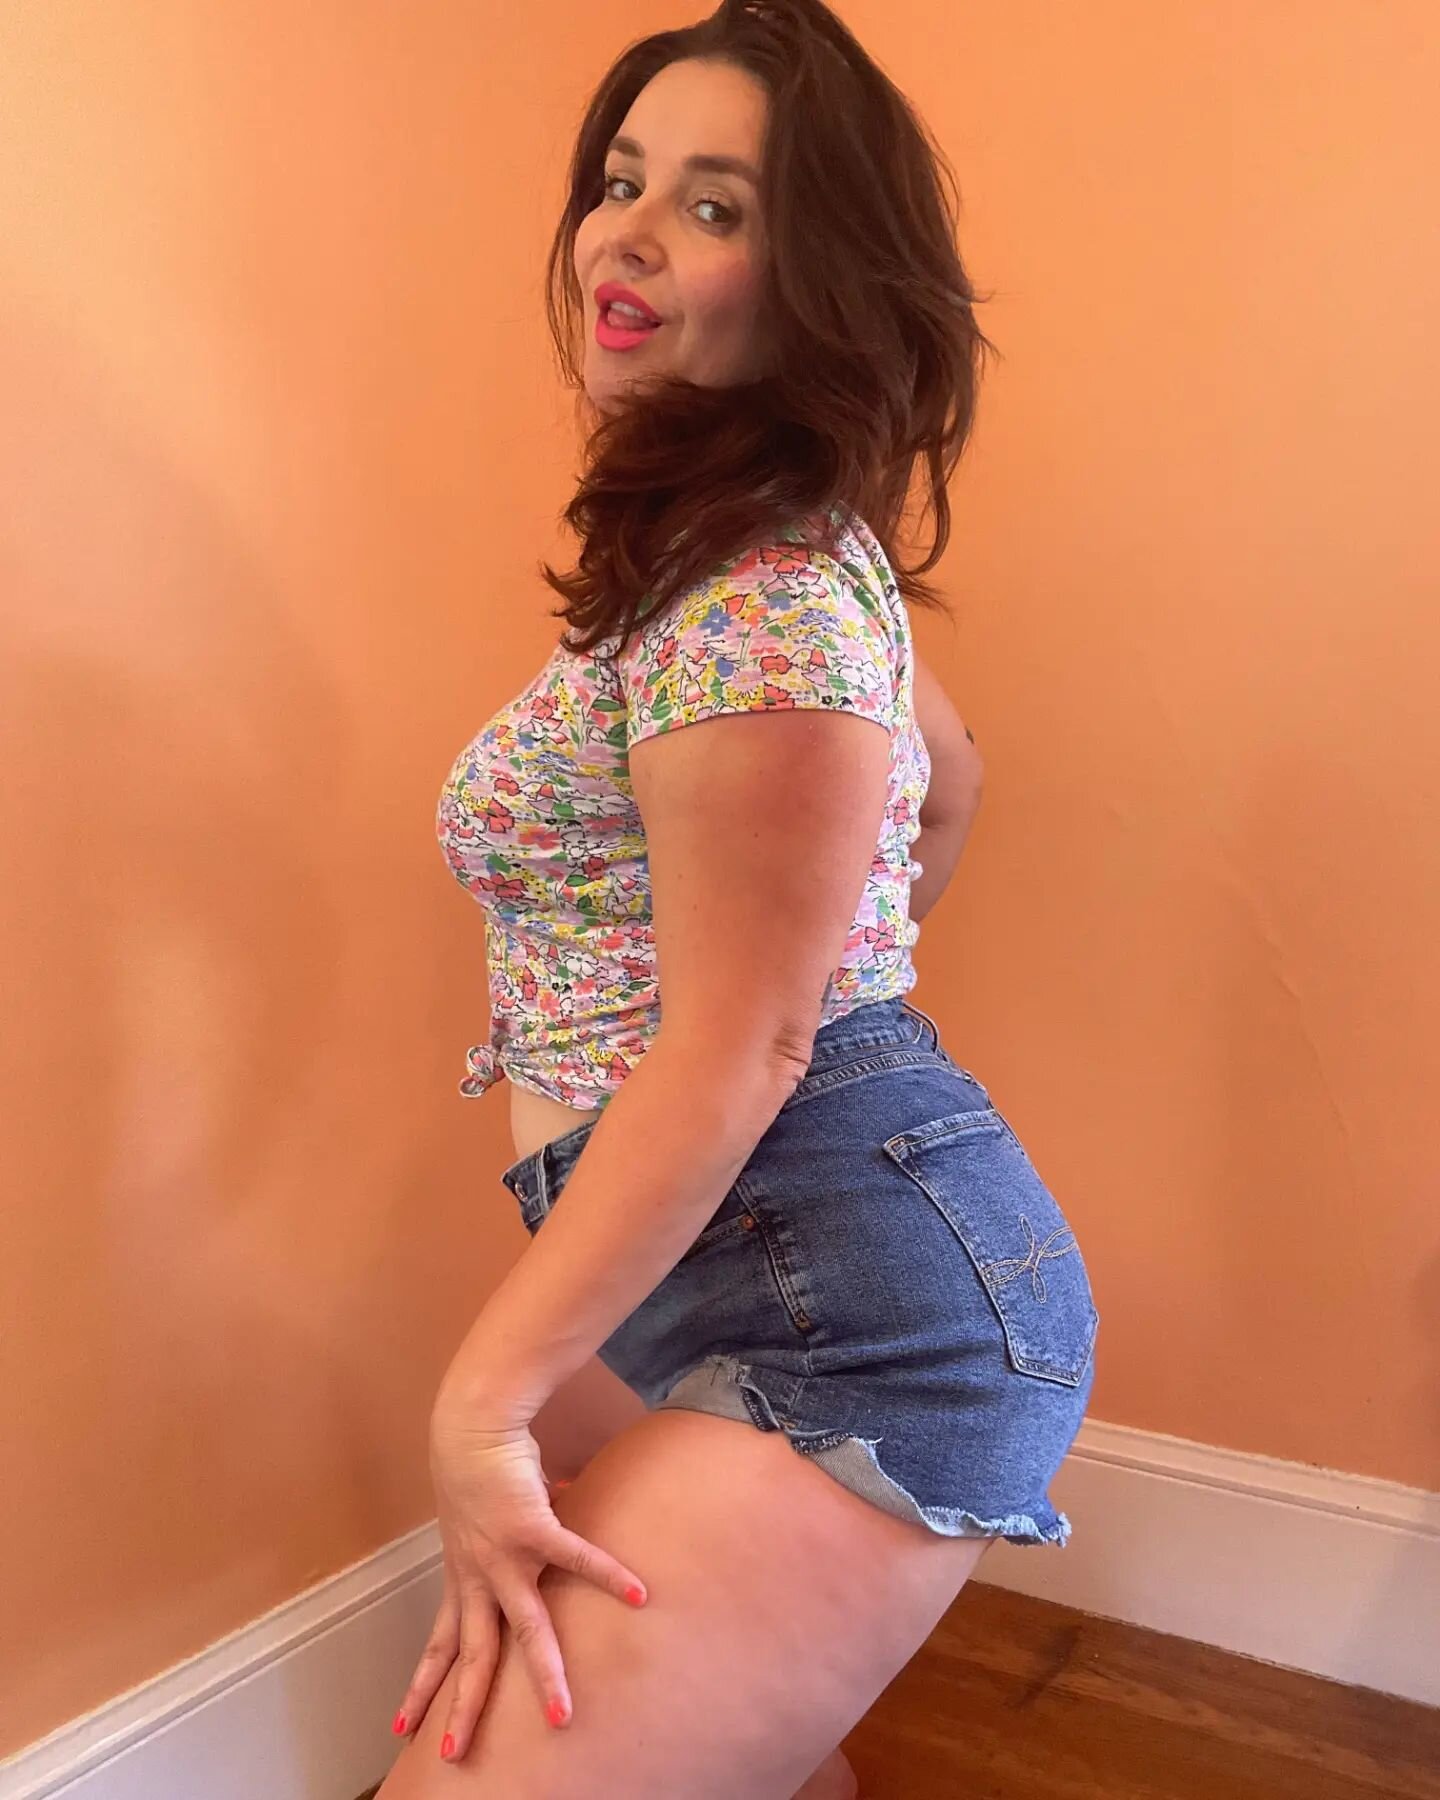 🍑🍑
I'm busy packing all my short shorts for LA this week🌴! You like?
I have 1 more opening on 6/30 in the afternoon. Are you ready to be brave and *finally* meet Mommy?? I hope so 💘